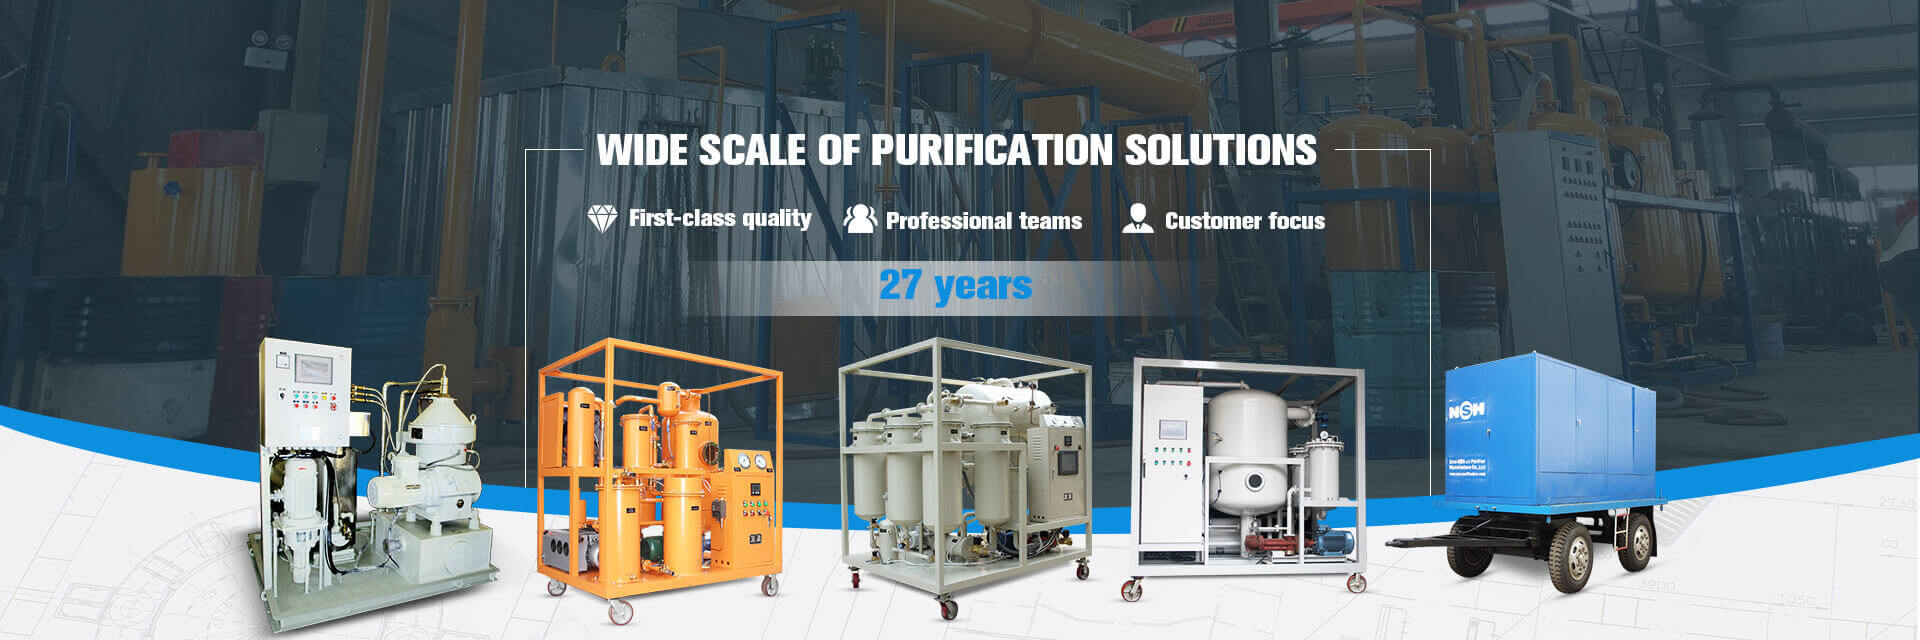 Wide Scale of Purification Solutions